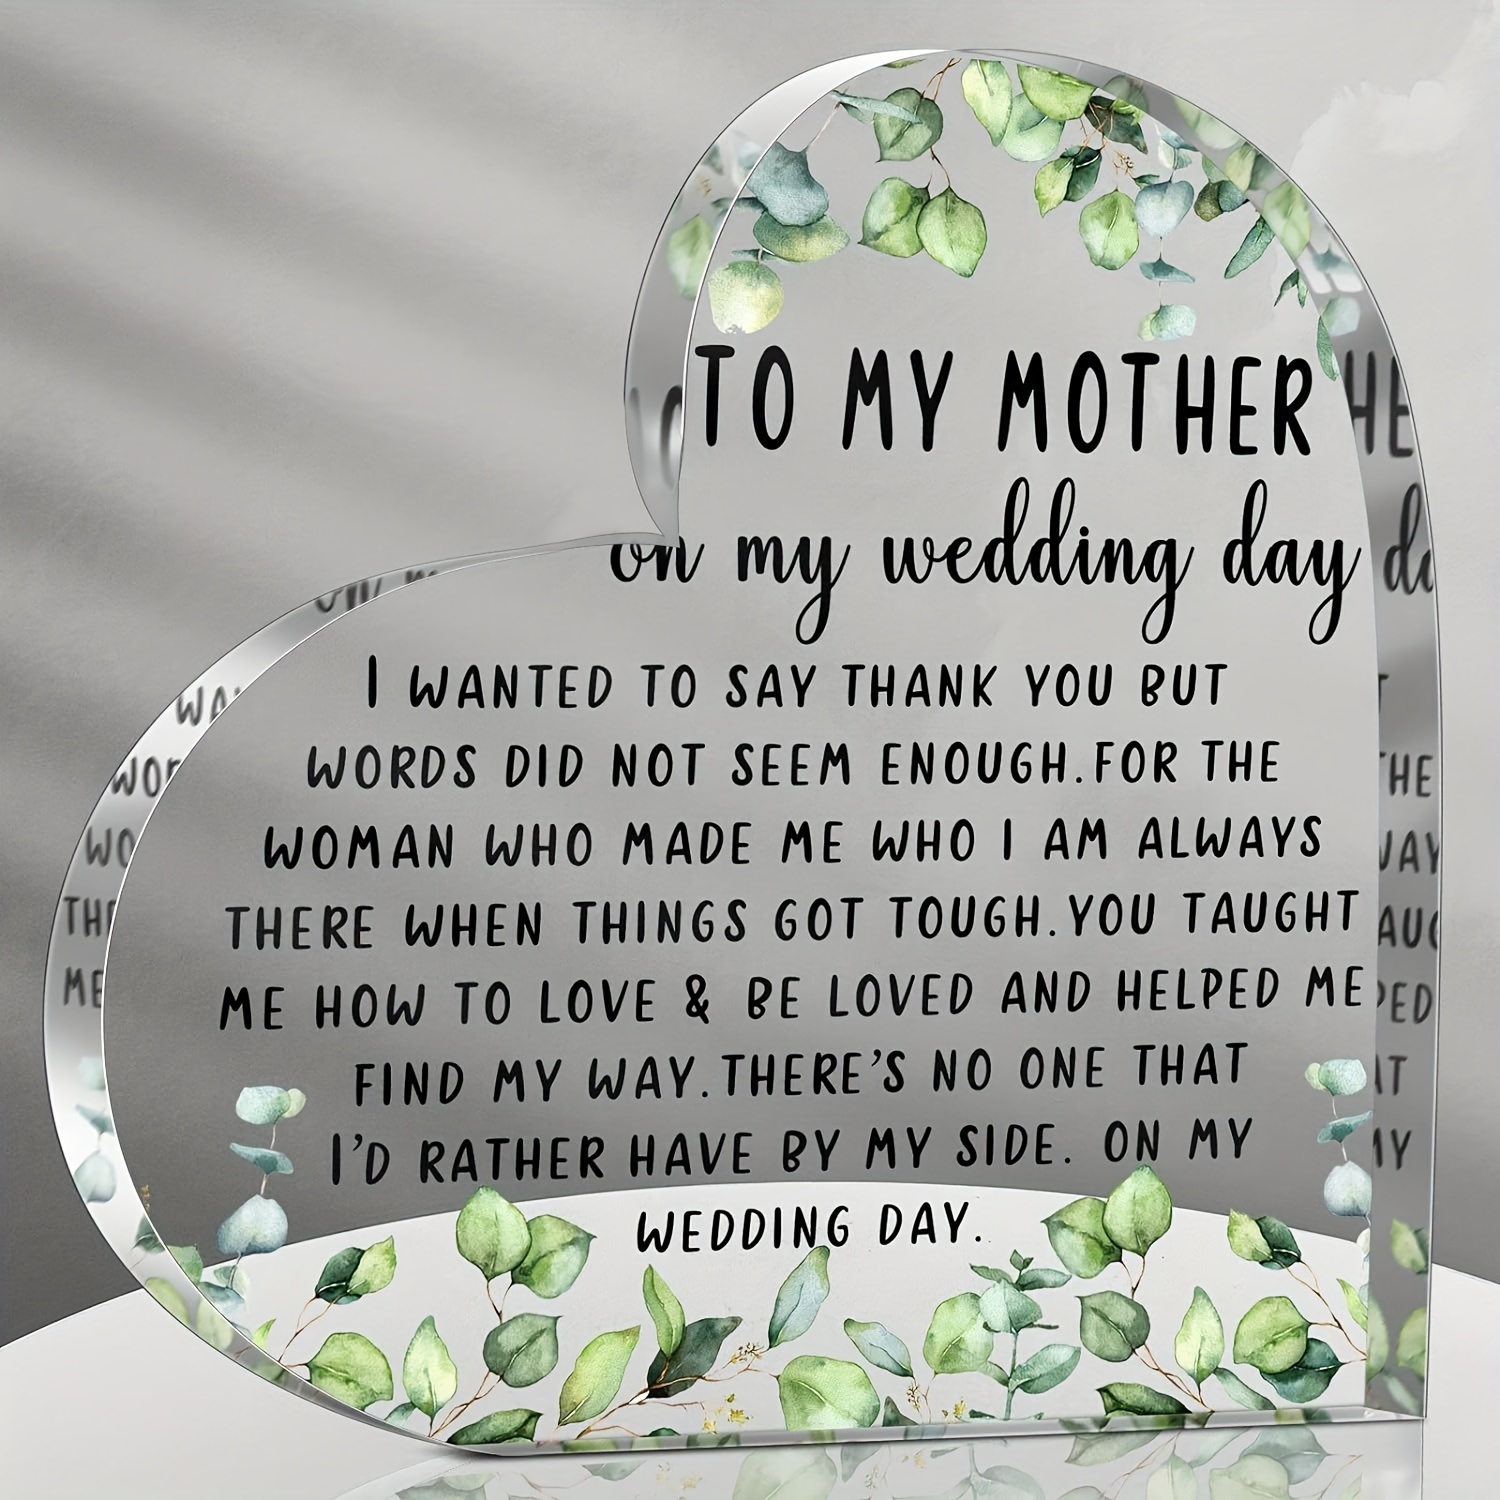 

1pc Gifts For Mother Of The Bride Mother Of The Bride Gifts From Daughter Thank You For Being The Best Mom Acrylic Heart Keepsake Wedding Gift From Daughter Thank You Wedding Gift (leaves)